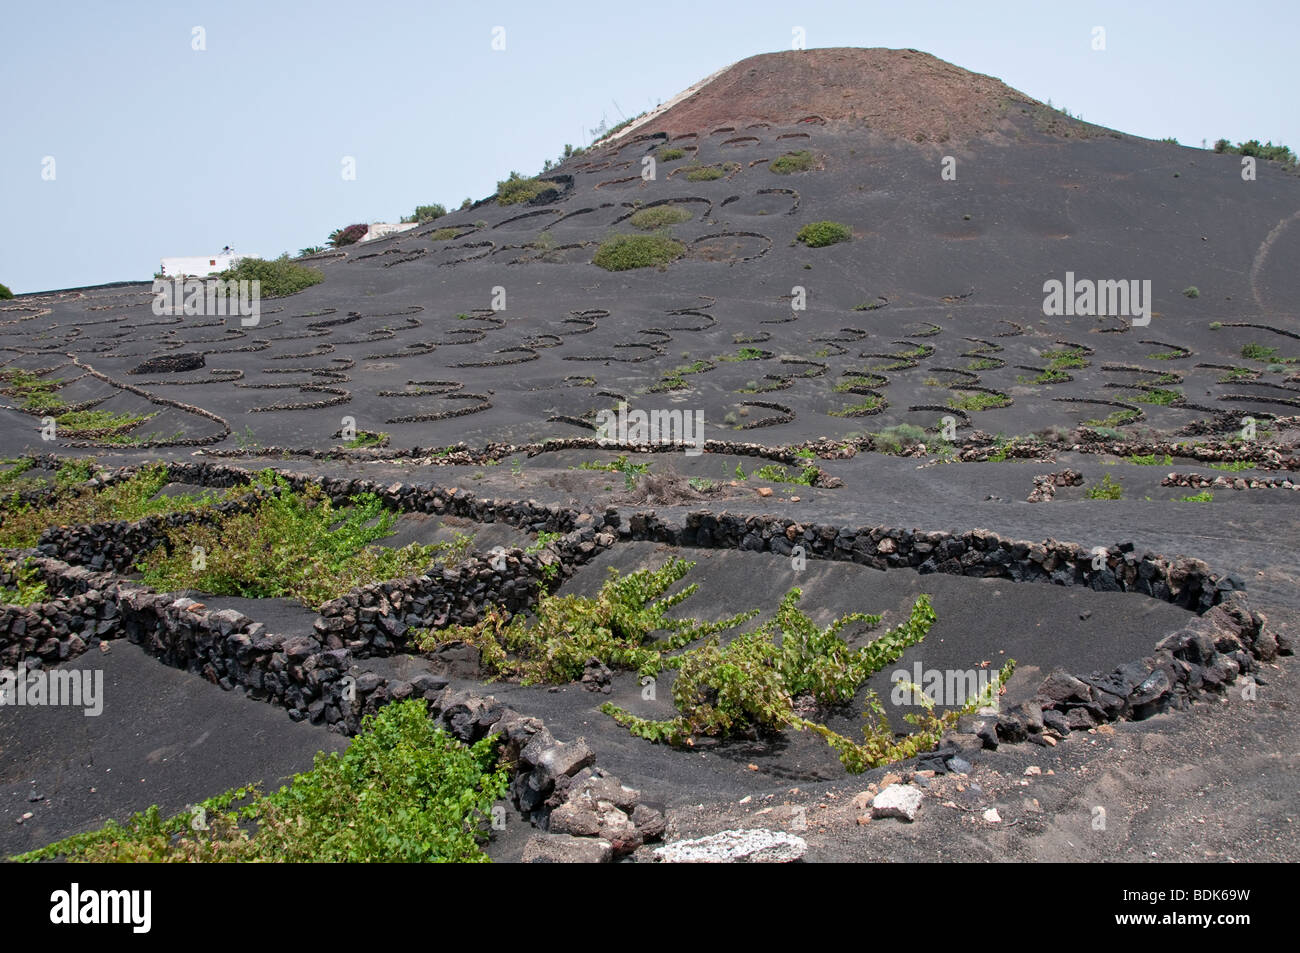 Vines being cultivated in volcanic soil, growing behind semi-circular wind breaks. La Geria, Lanzarote, Canary Islands Stock Photo